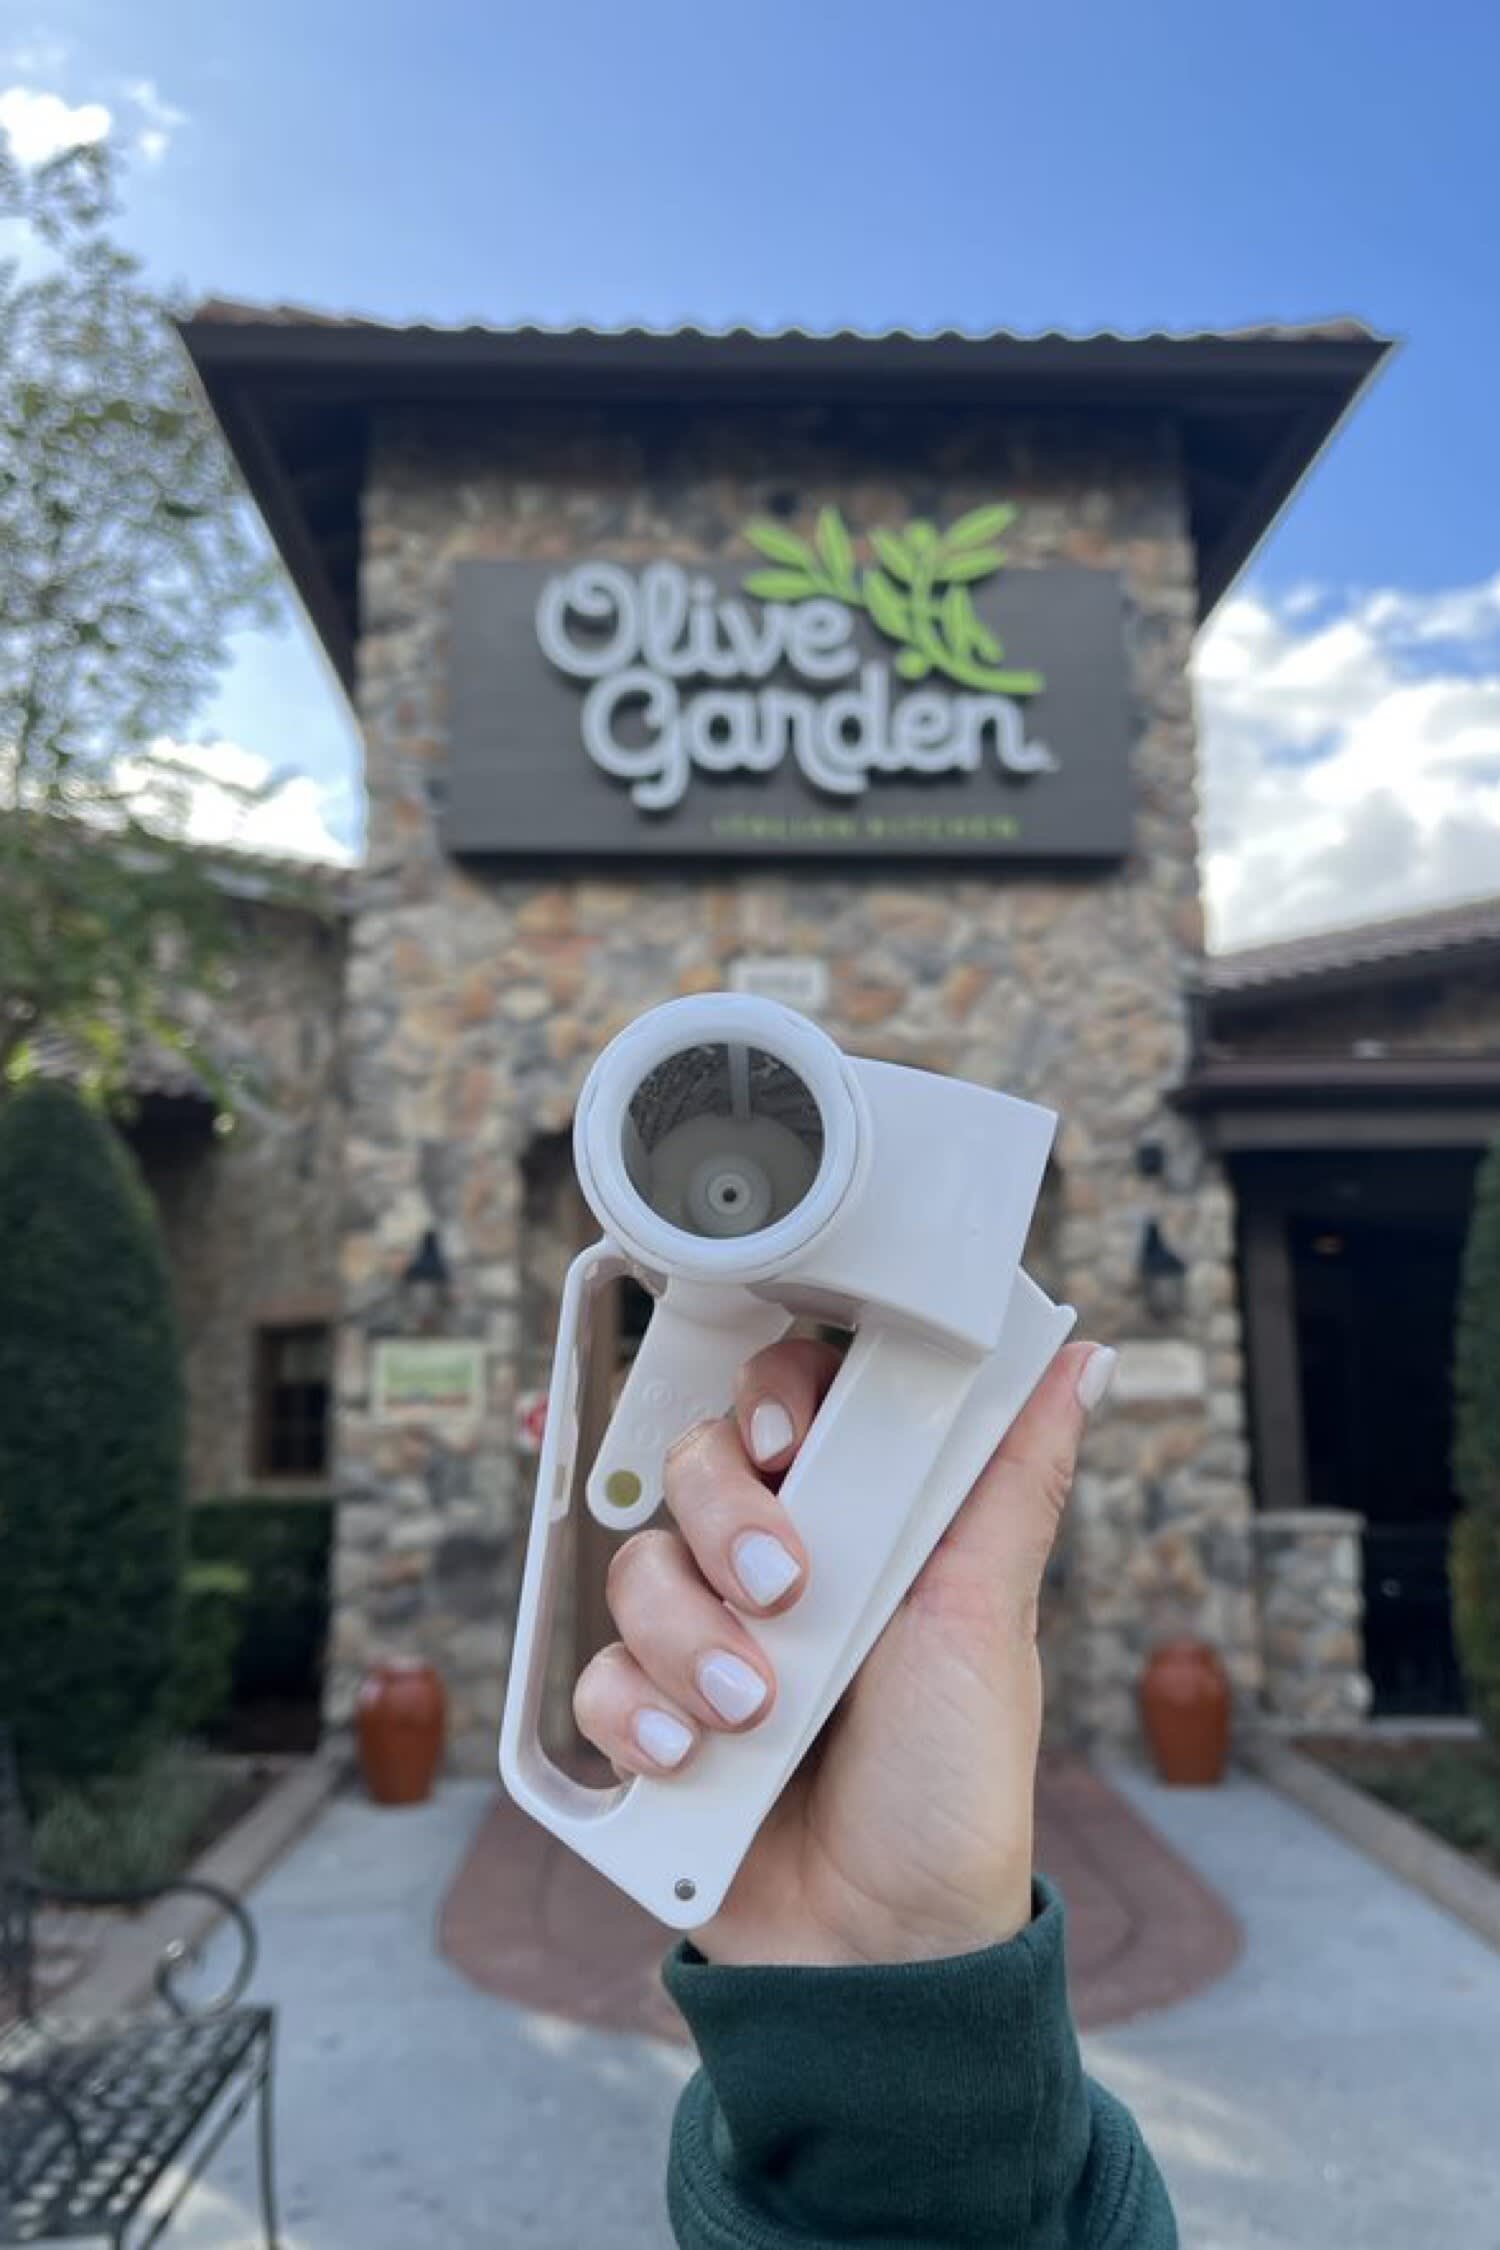 People just found out you can buy Olive Garden cheese graters - Upworthy